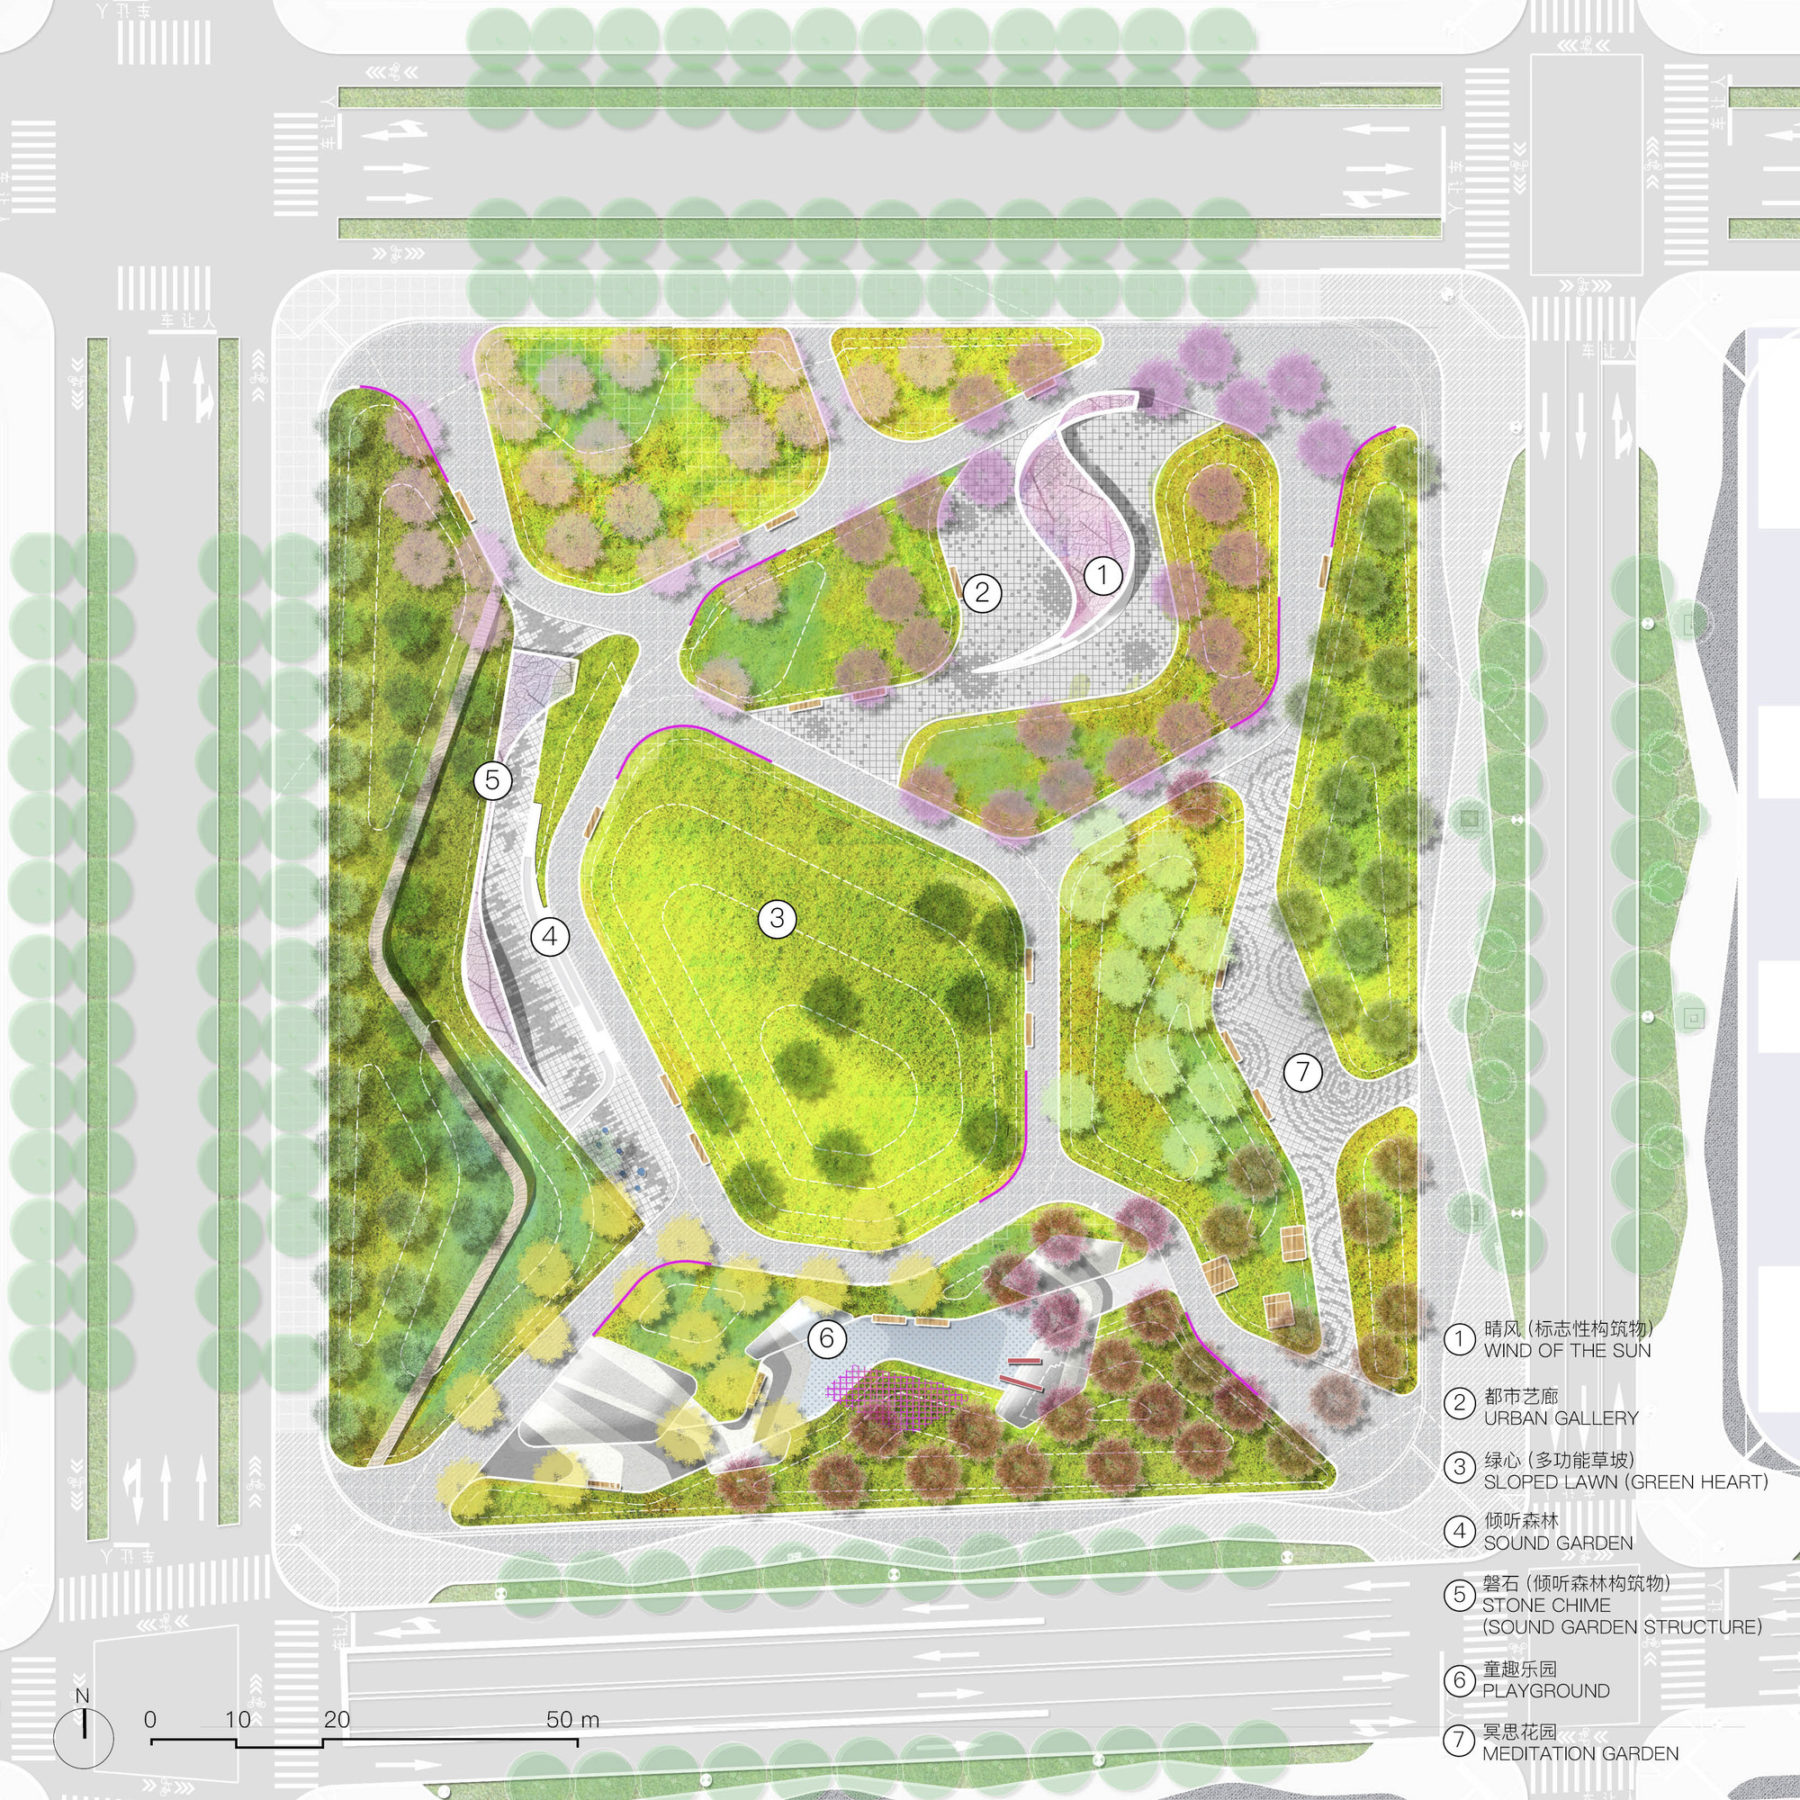 Rendered aerial view of the park